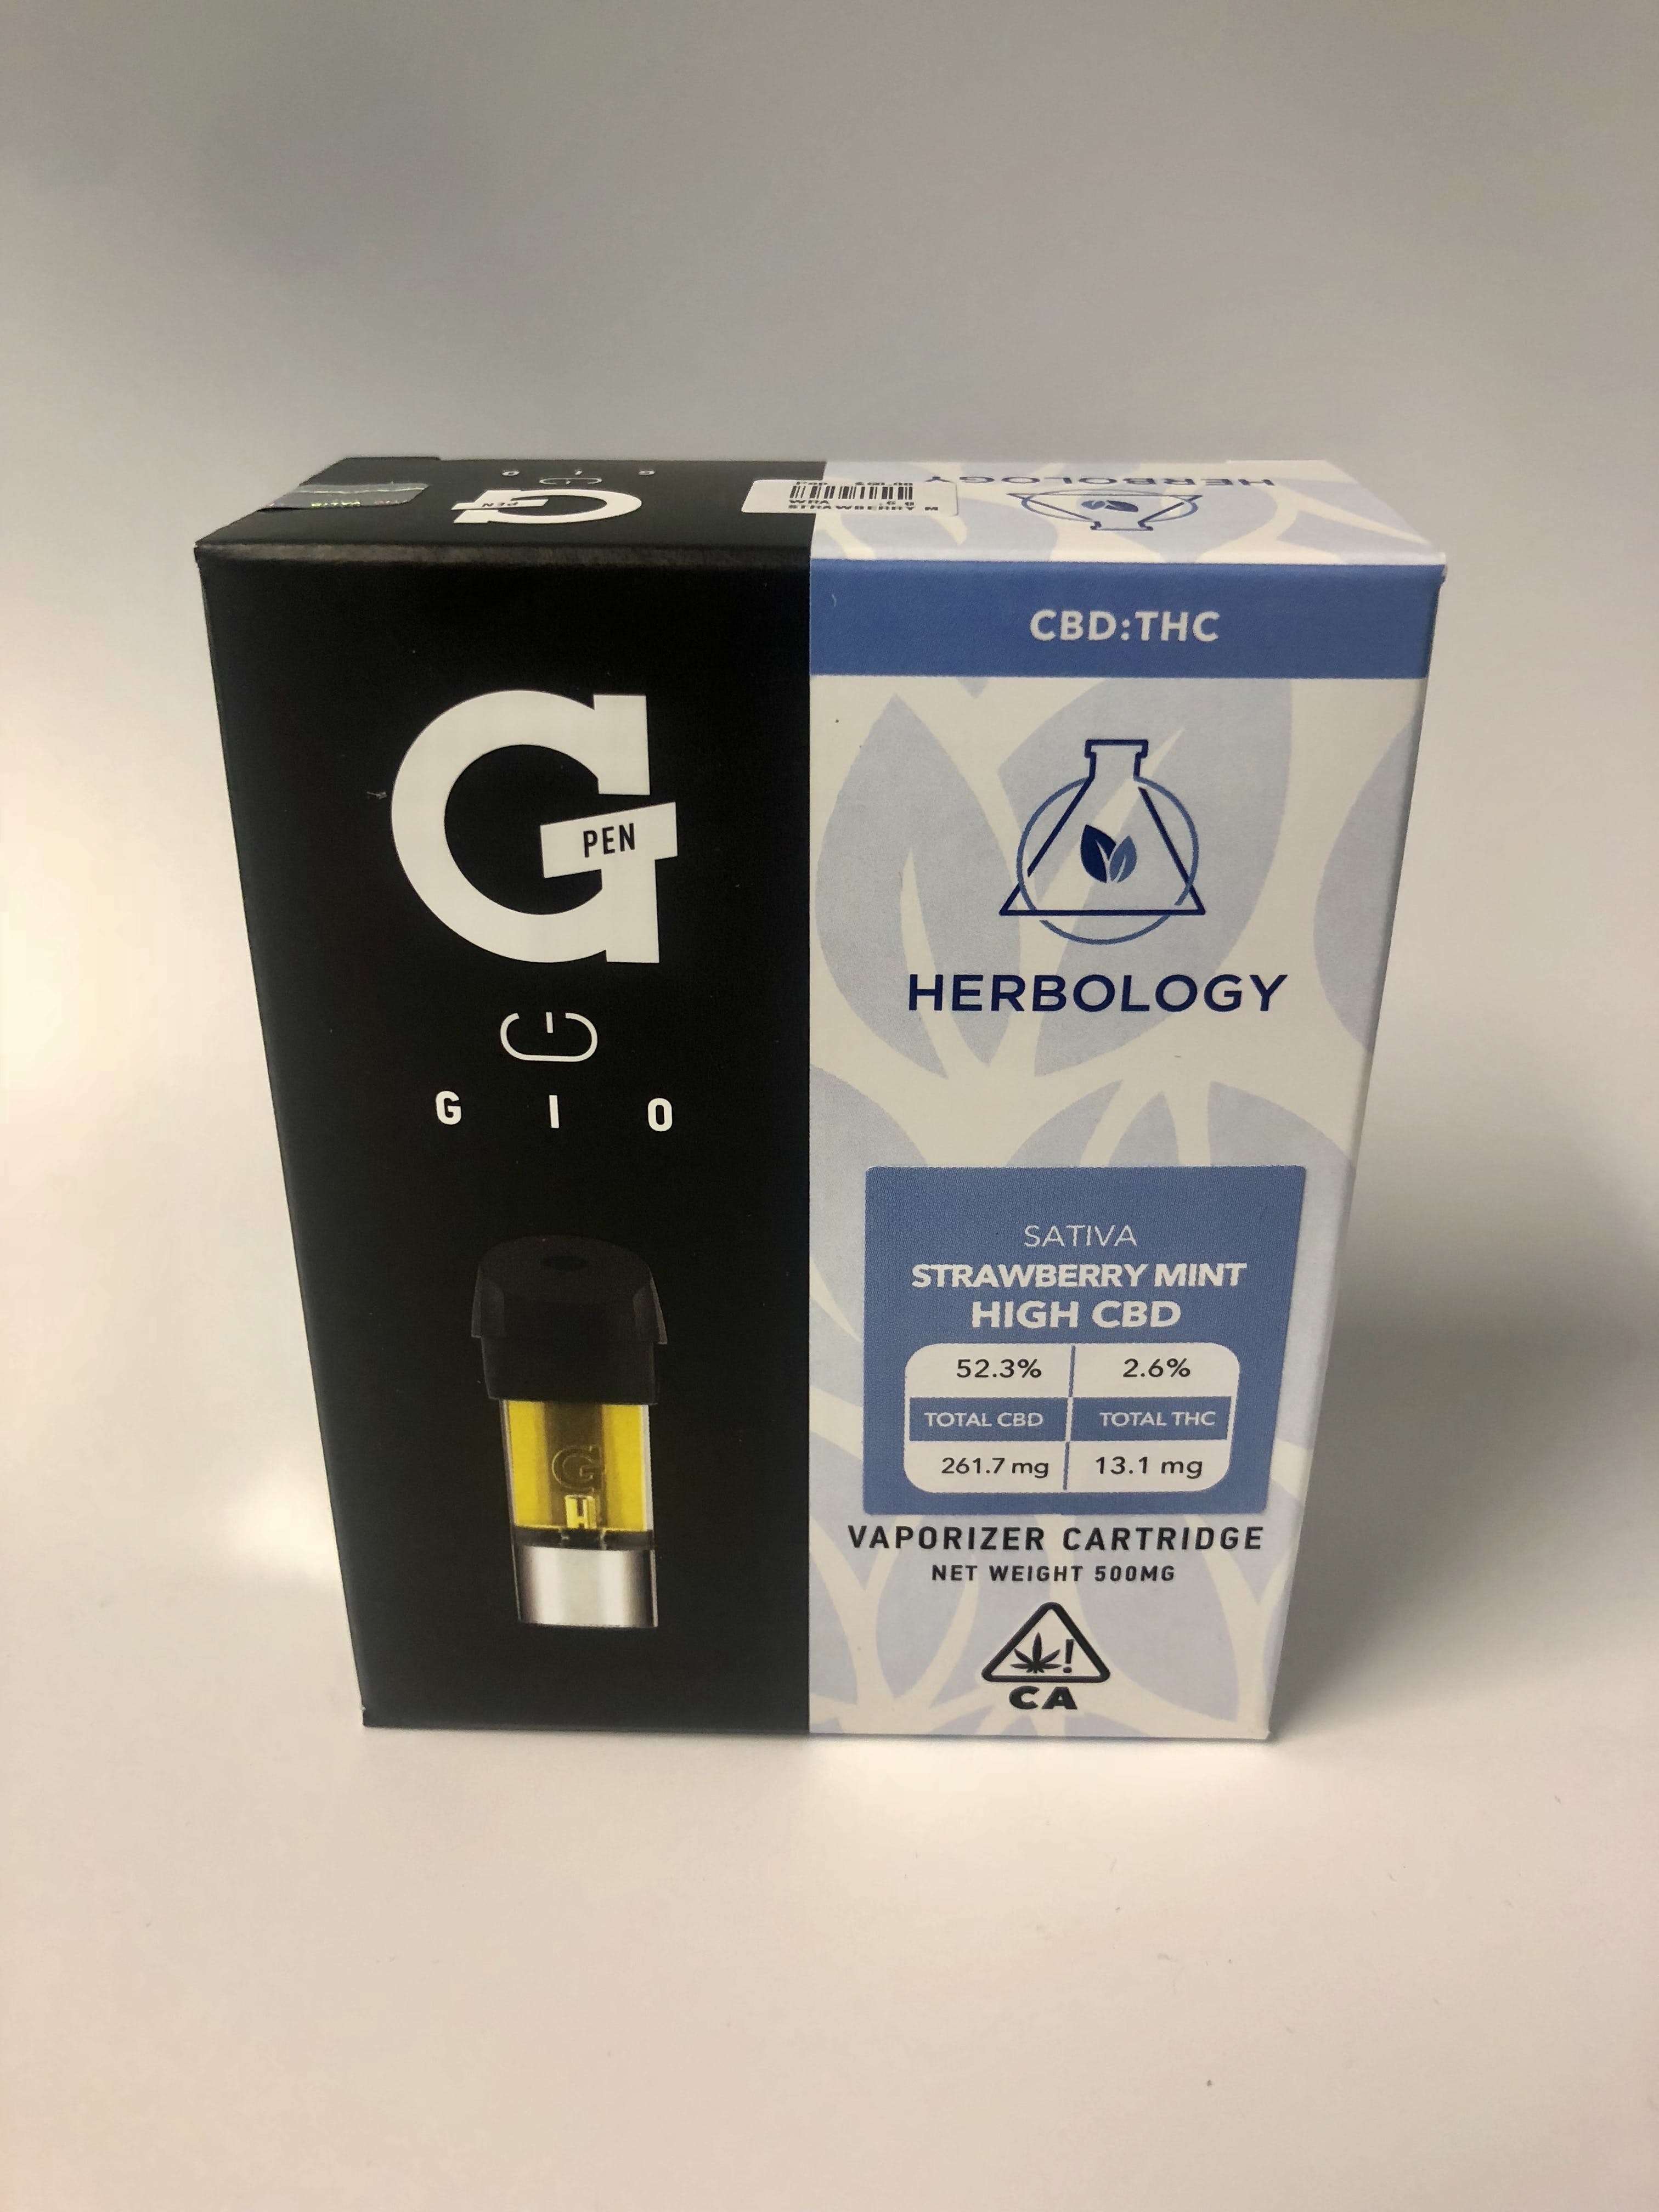 concentrate-strawberry-mint-high-cbd-251-herbology-gio-cartridge